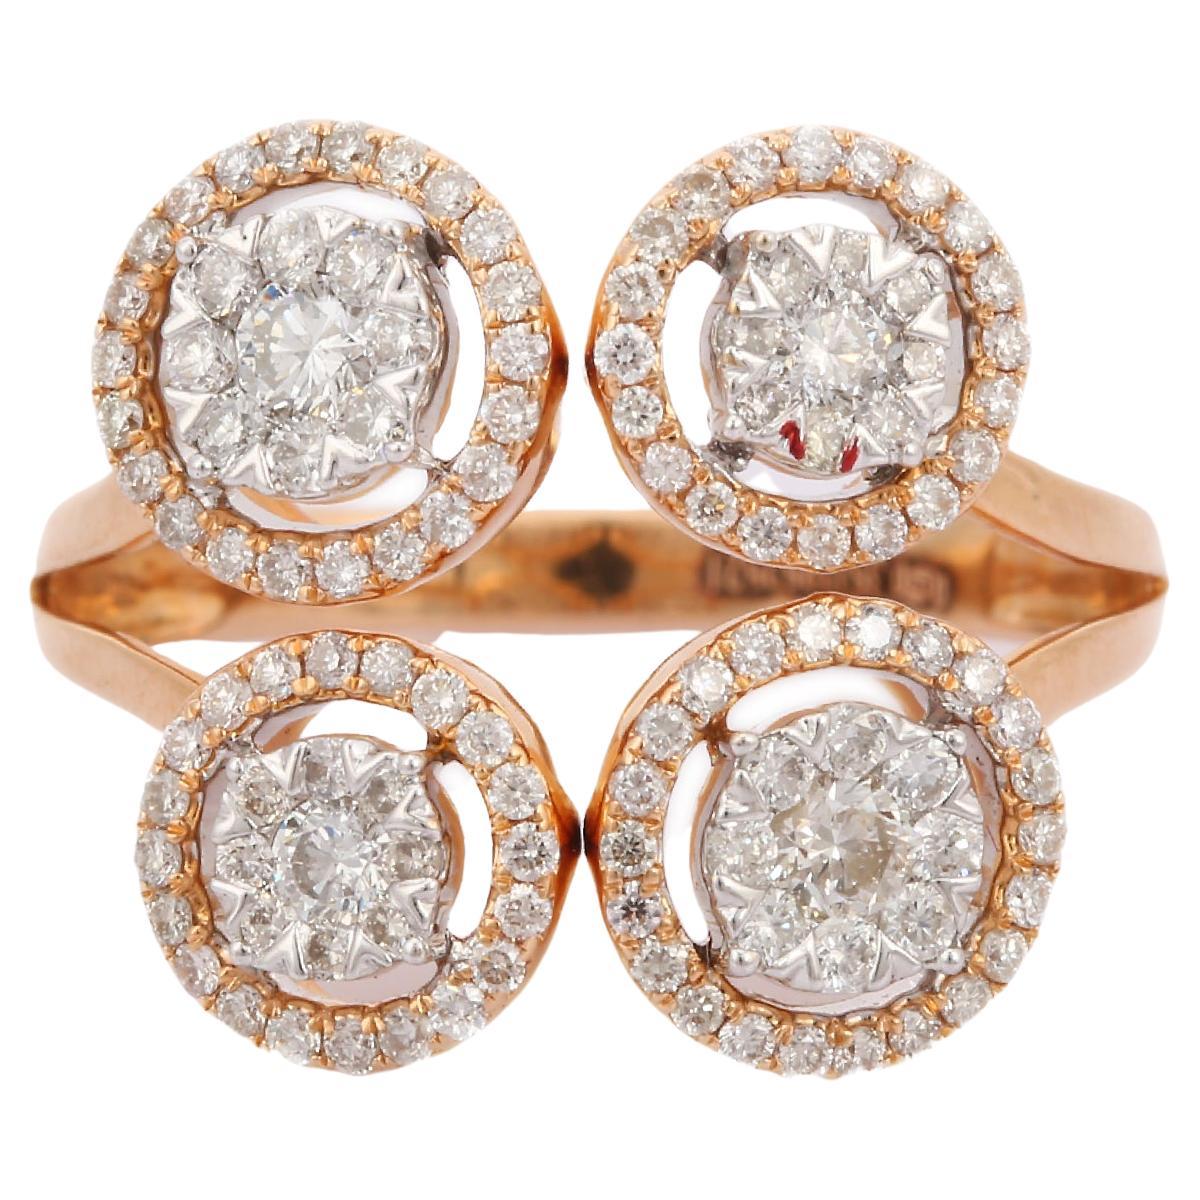 For Sale:  Statement Illusion Diamond Wedding Cluster Ring in 18K Solid Rose Gold